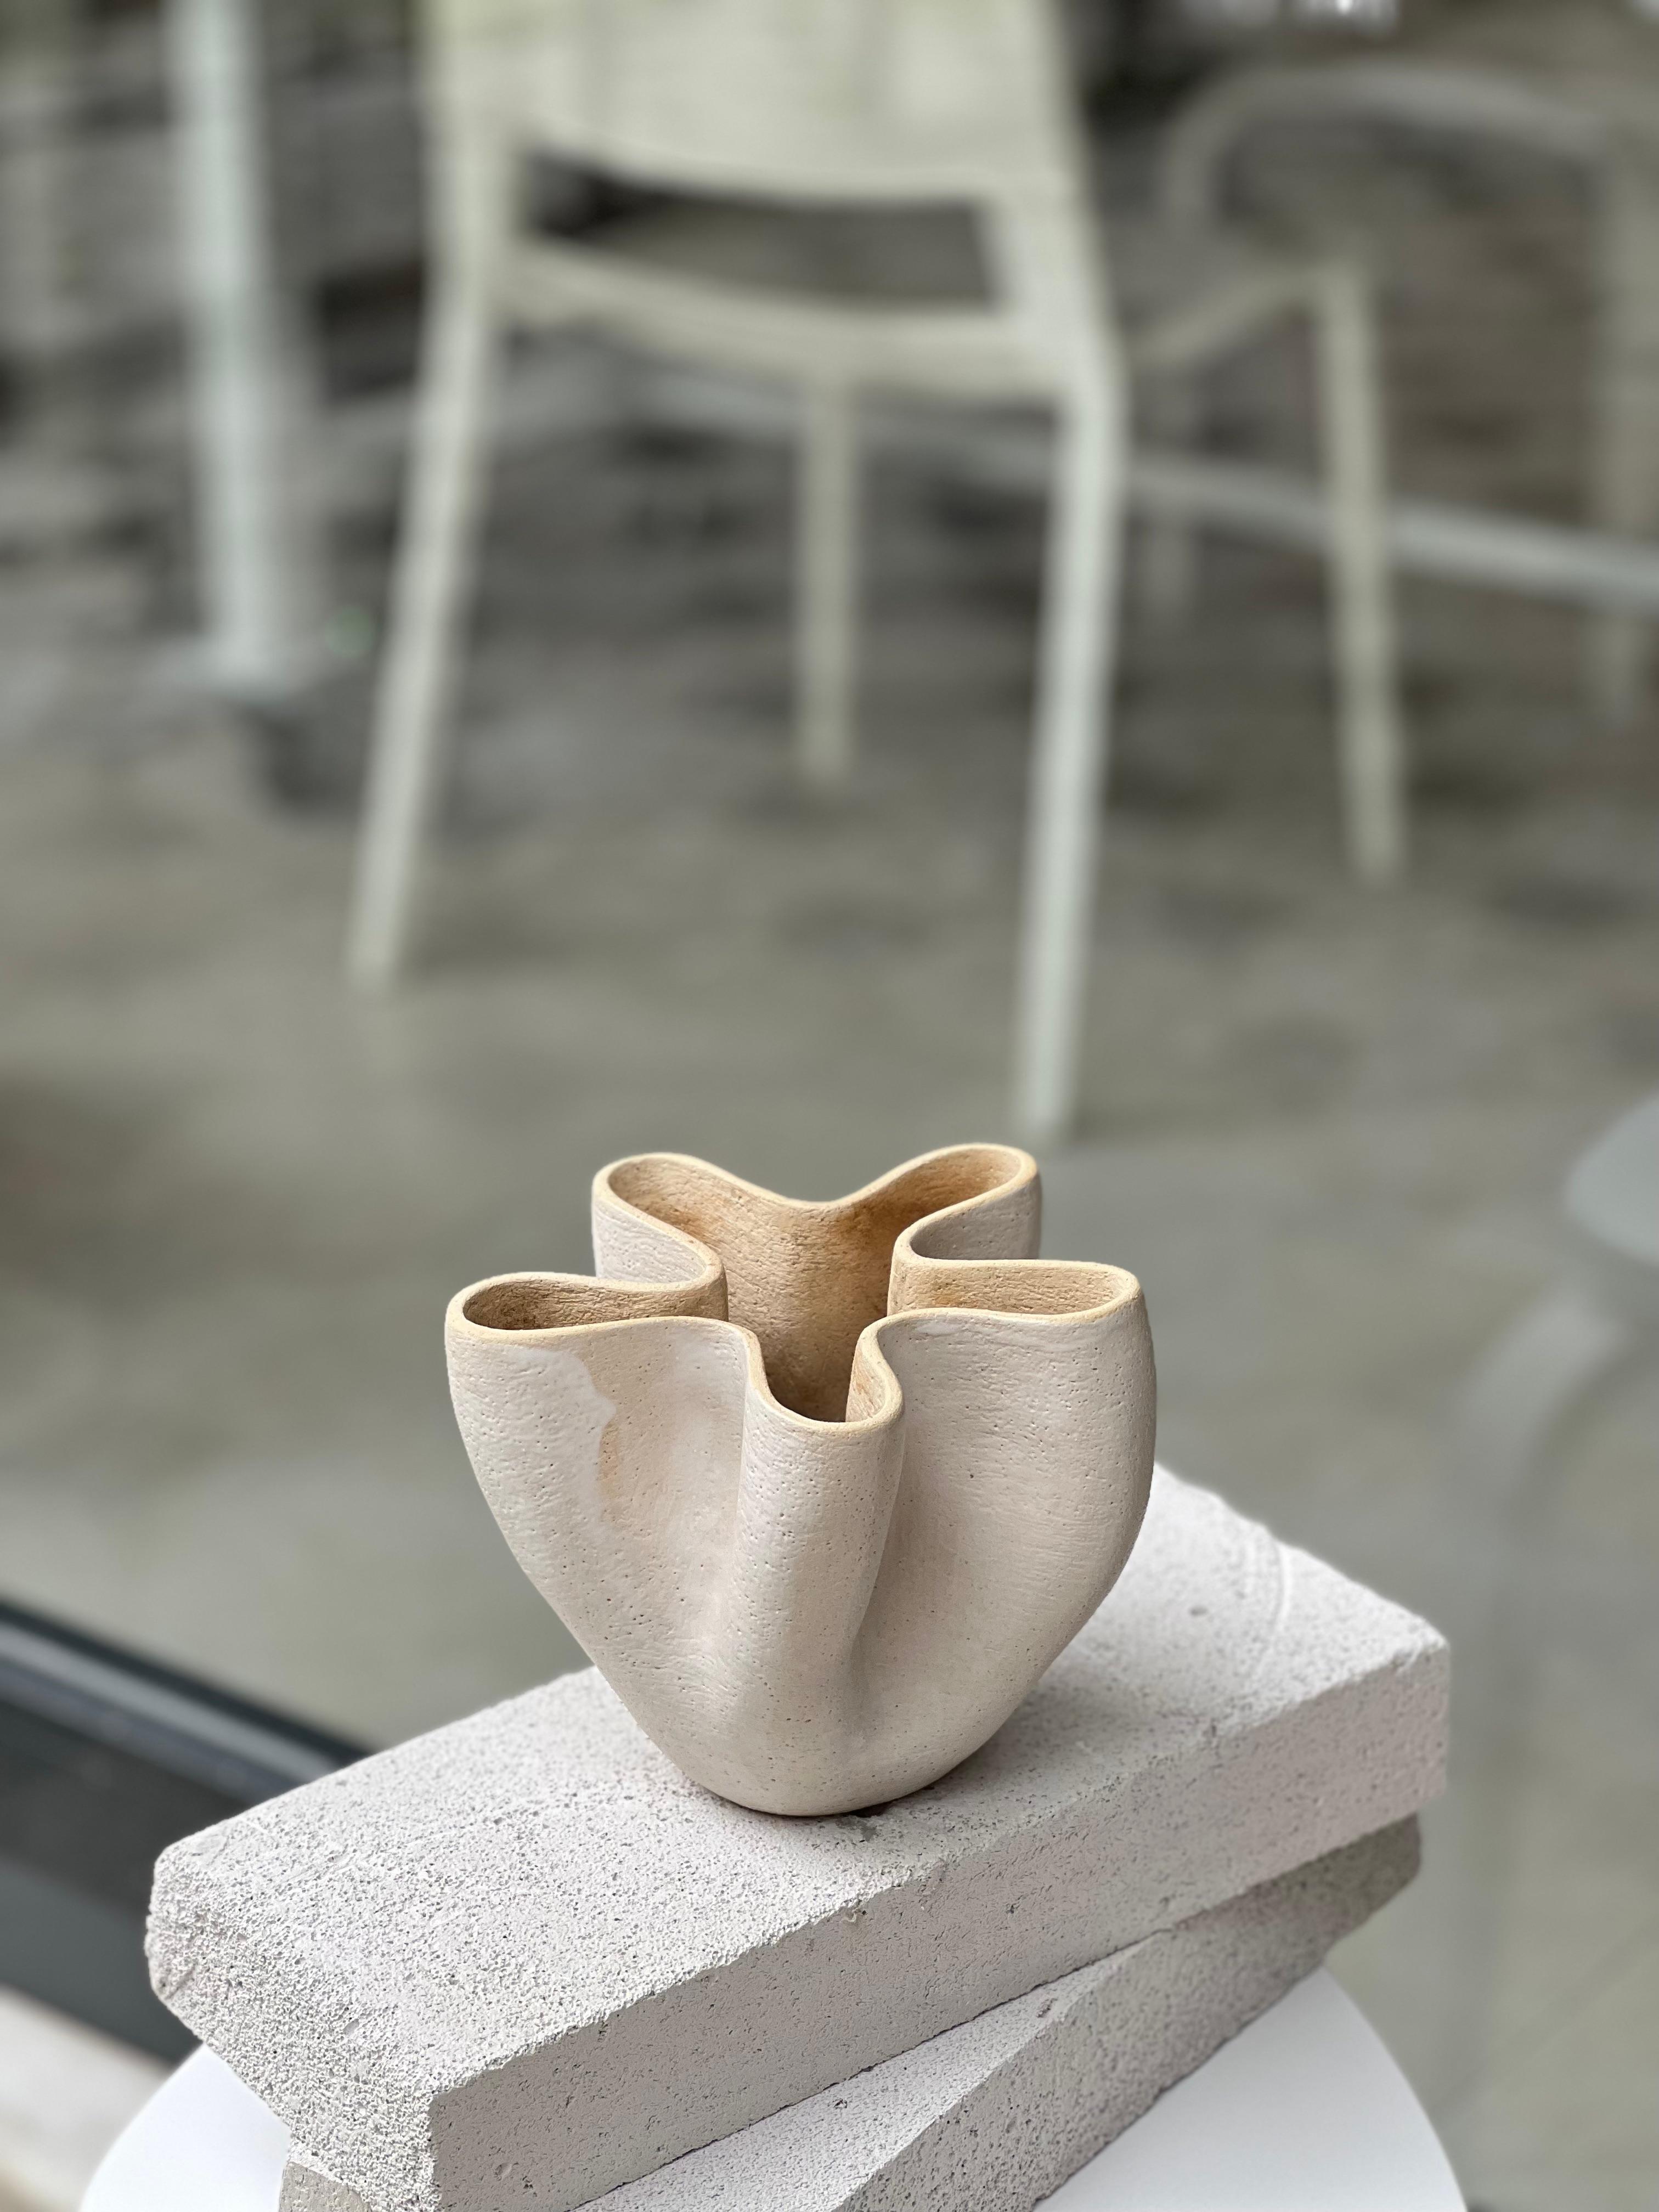 Anatolian 7 Vase by Güler Elçi
Dimensions: W 17.7 x D 17.7 x H 20.3 cm.
Materials: Stoneware Ceramic.

Güler Elçi is a ceramic artist based in Istanbul. In the light of her engineering career, she considers ceramics as a material and likes to push